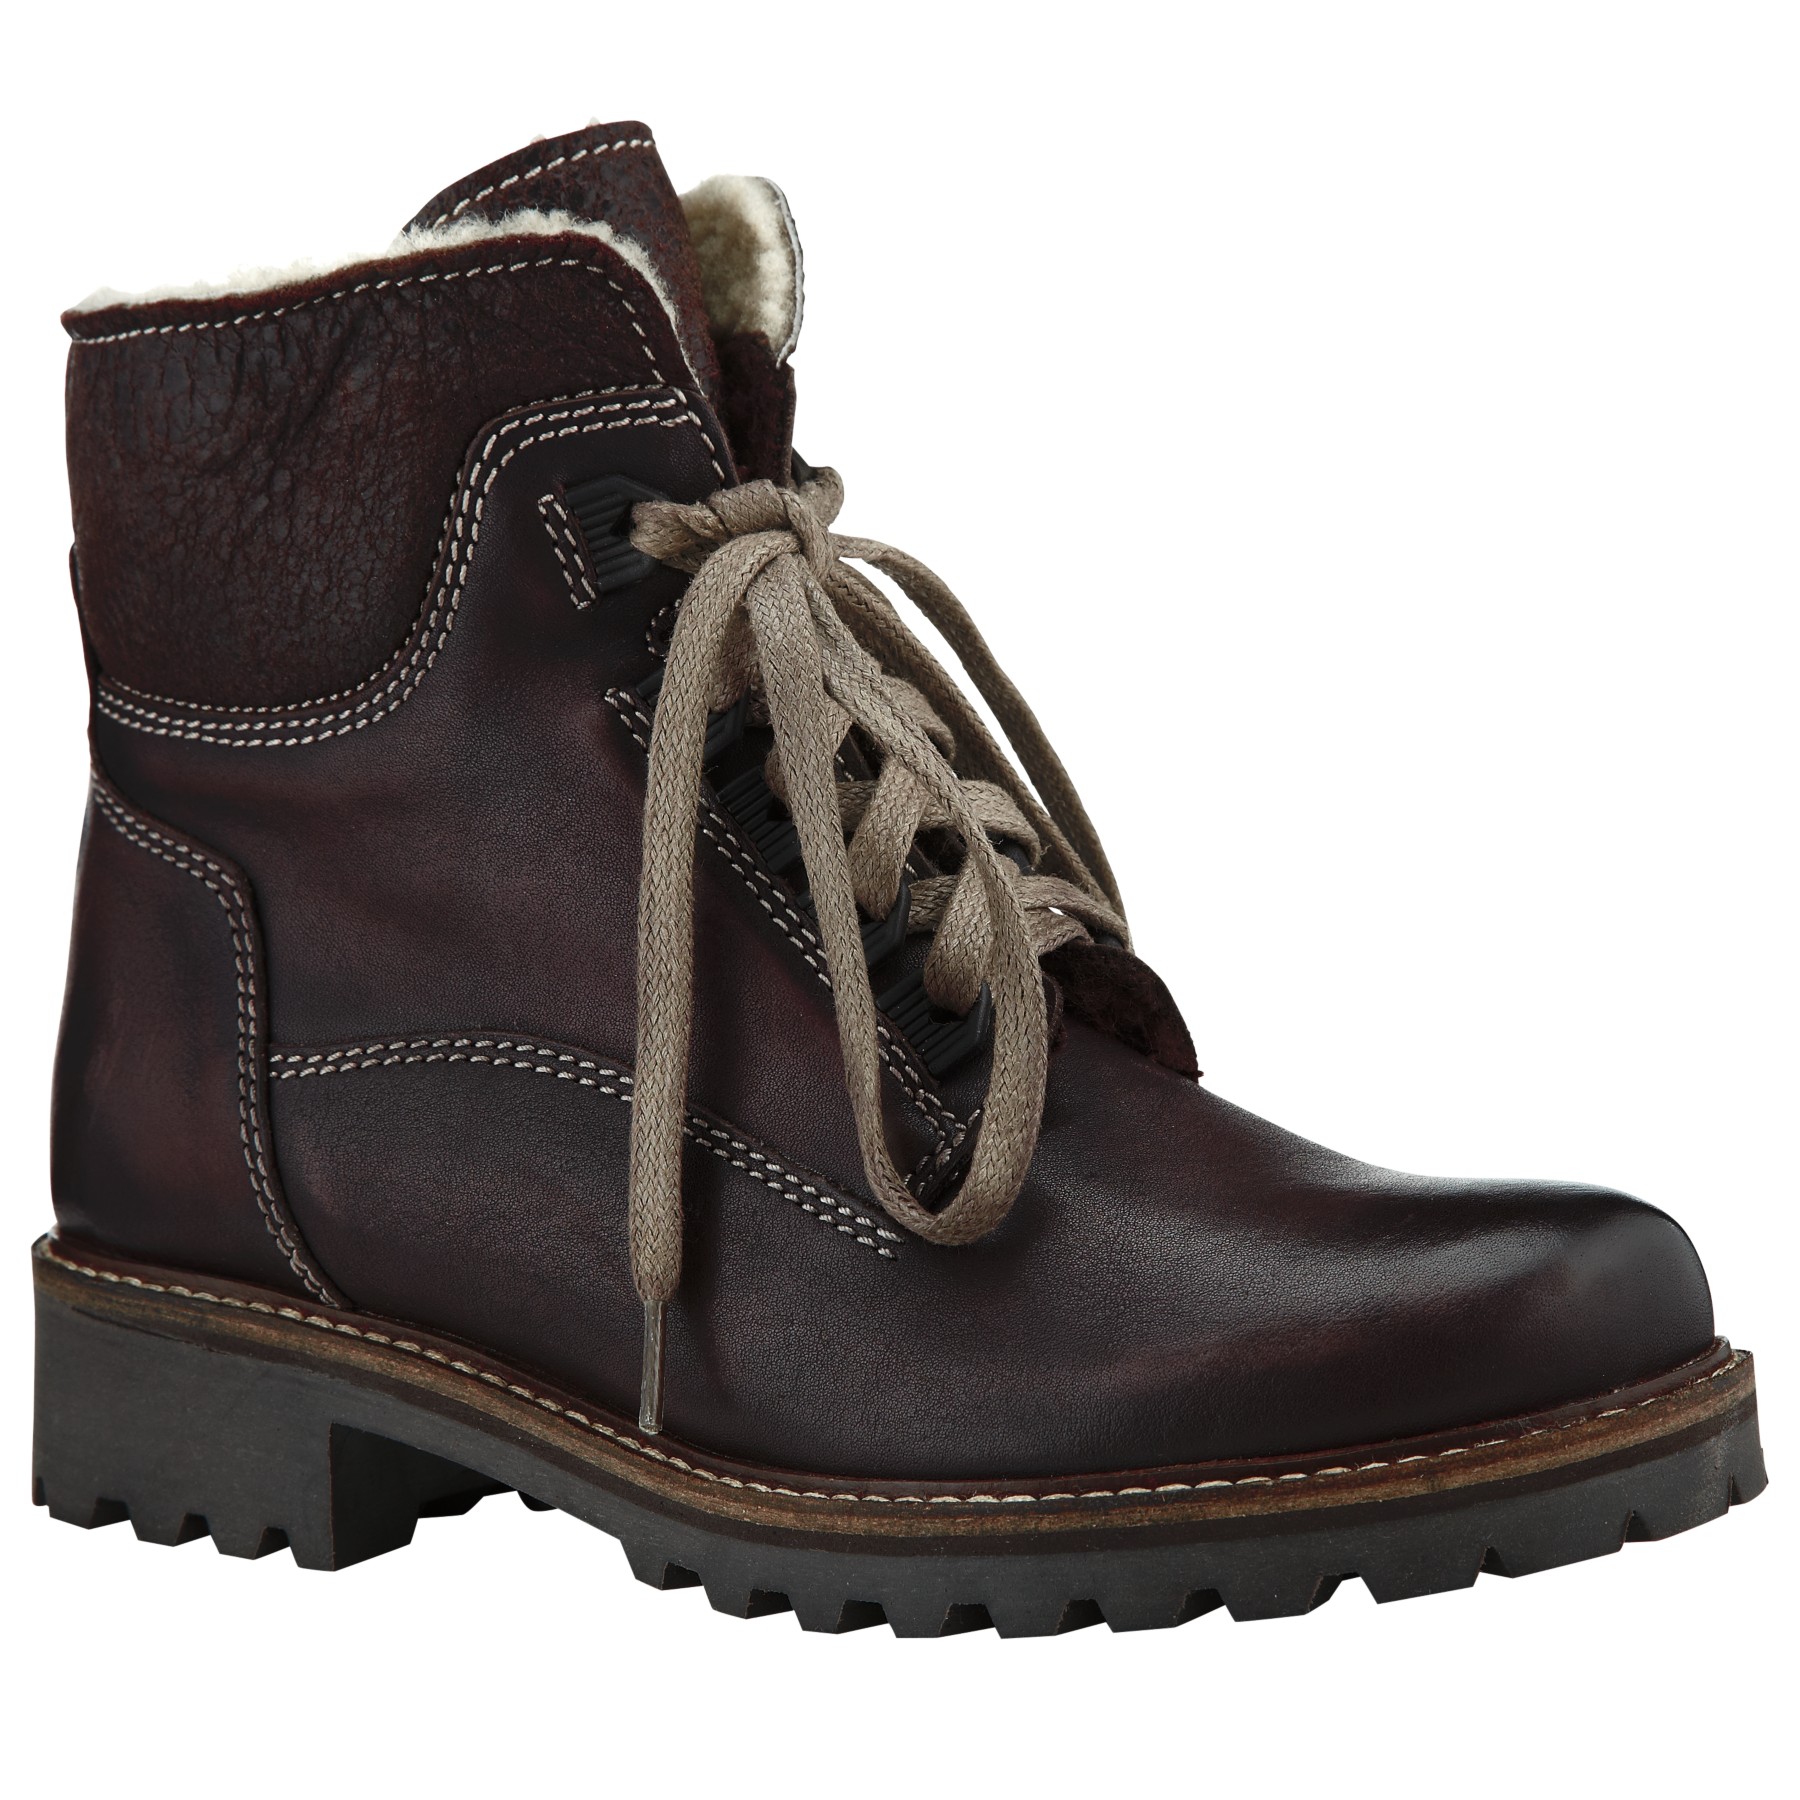 John Lewis Manchester 3 Ankle Boots in Brown | Lyst